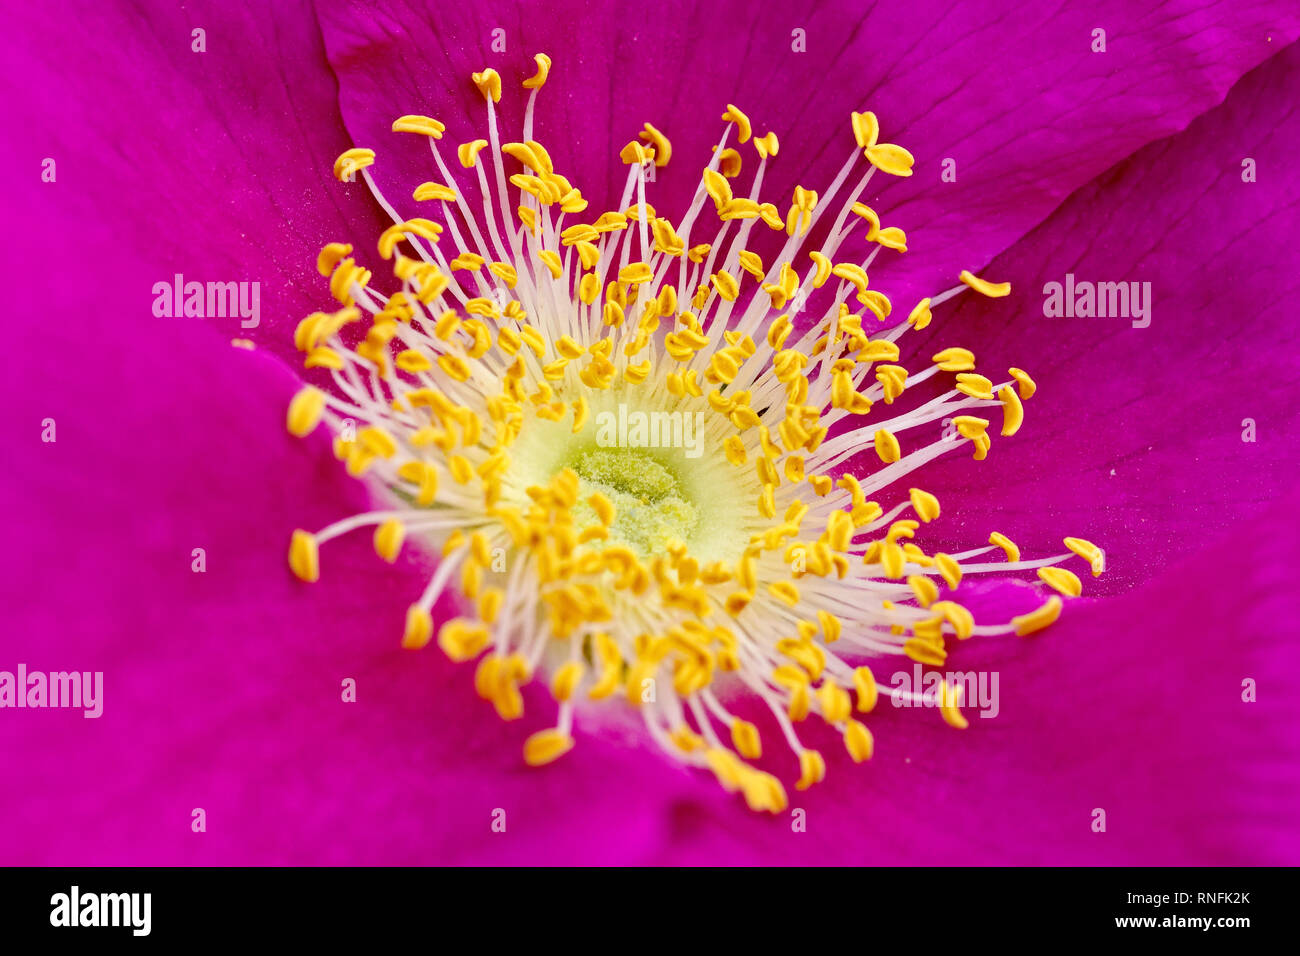 Wild Rose (rosa rugosa rubra), close up of the very centre of a flower showing detail of the stigma and stamens. Stock Photo